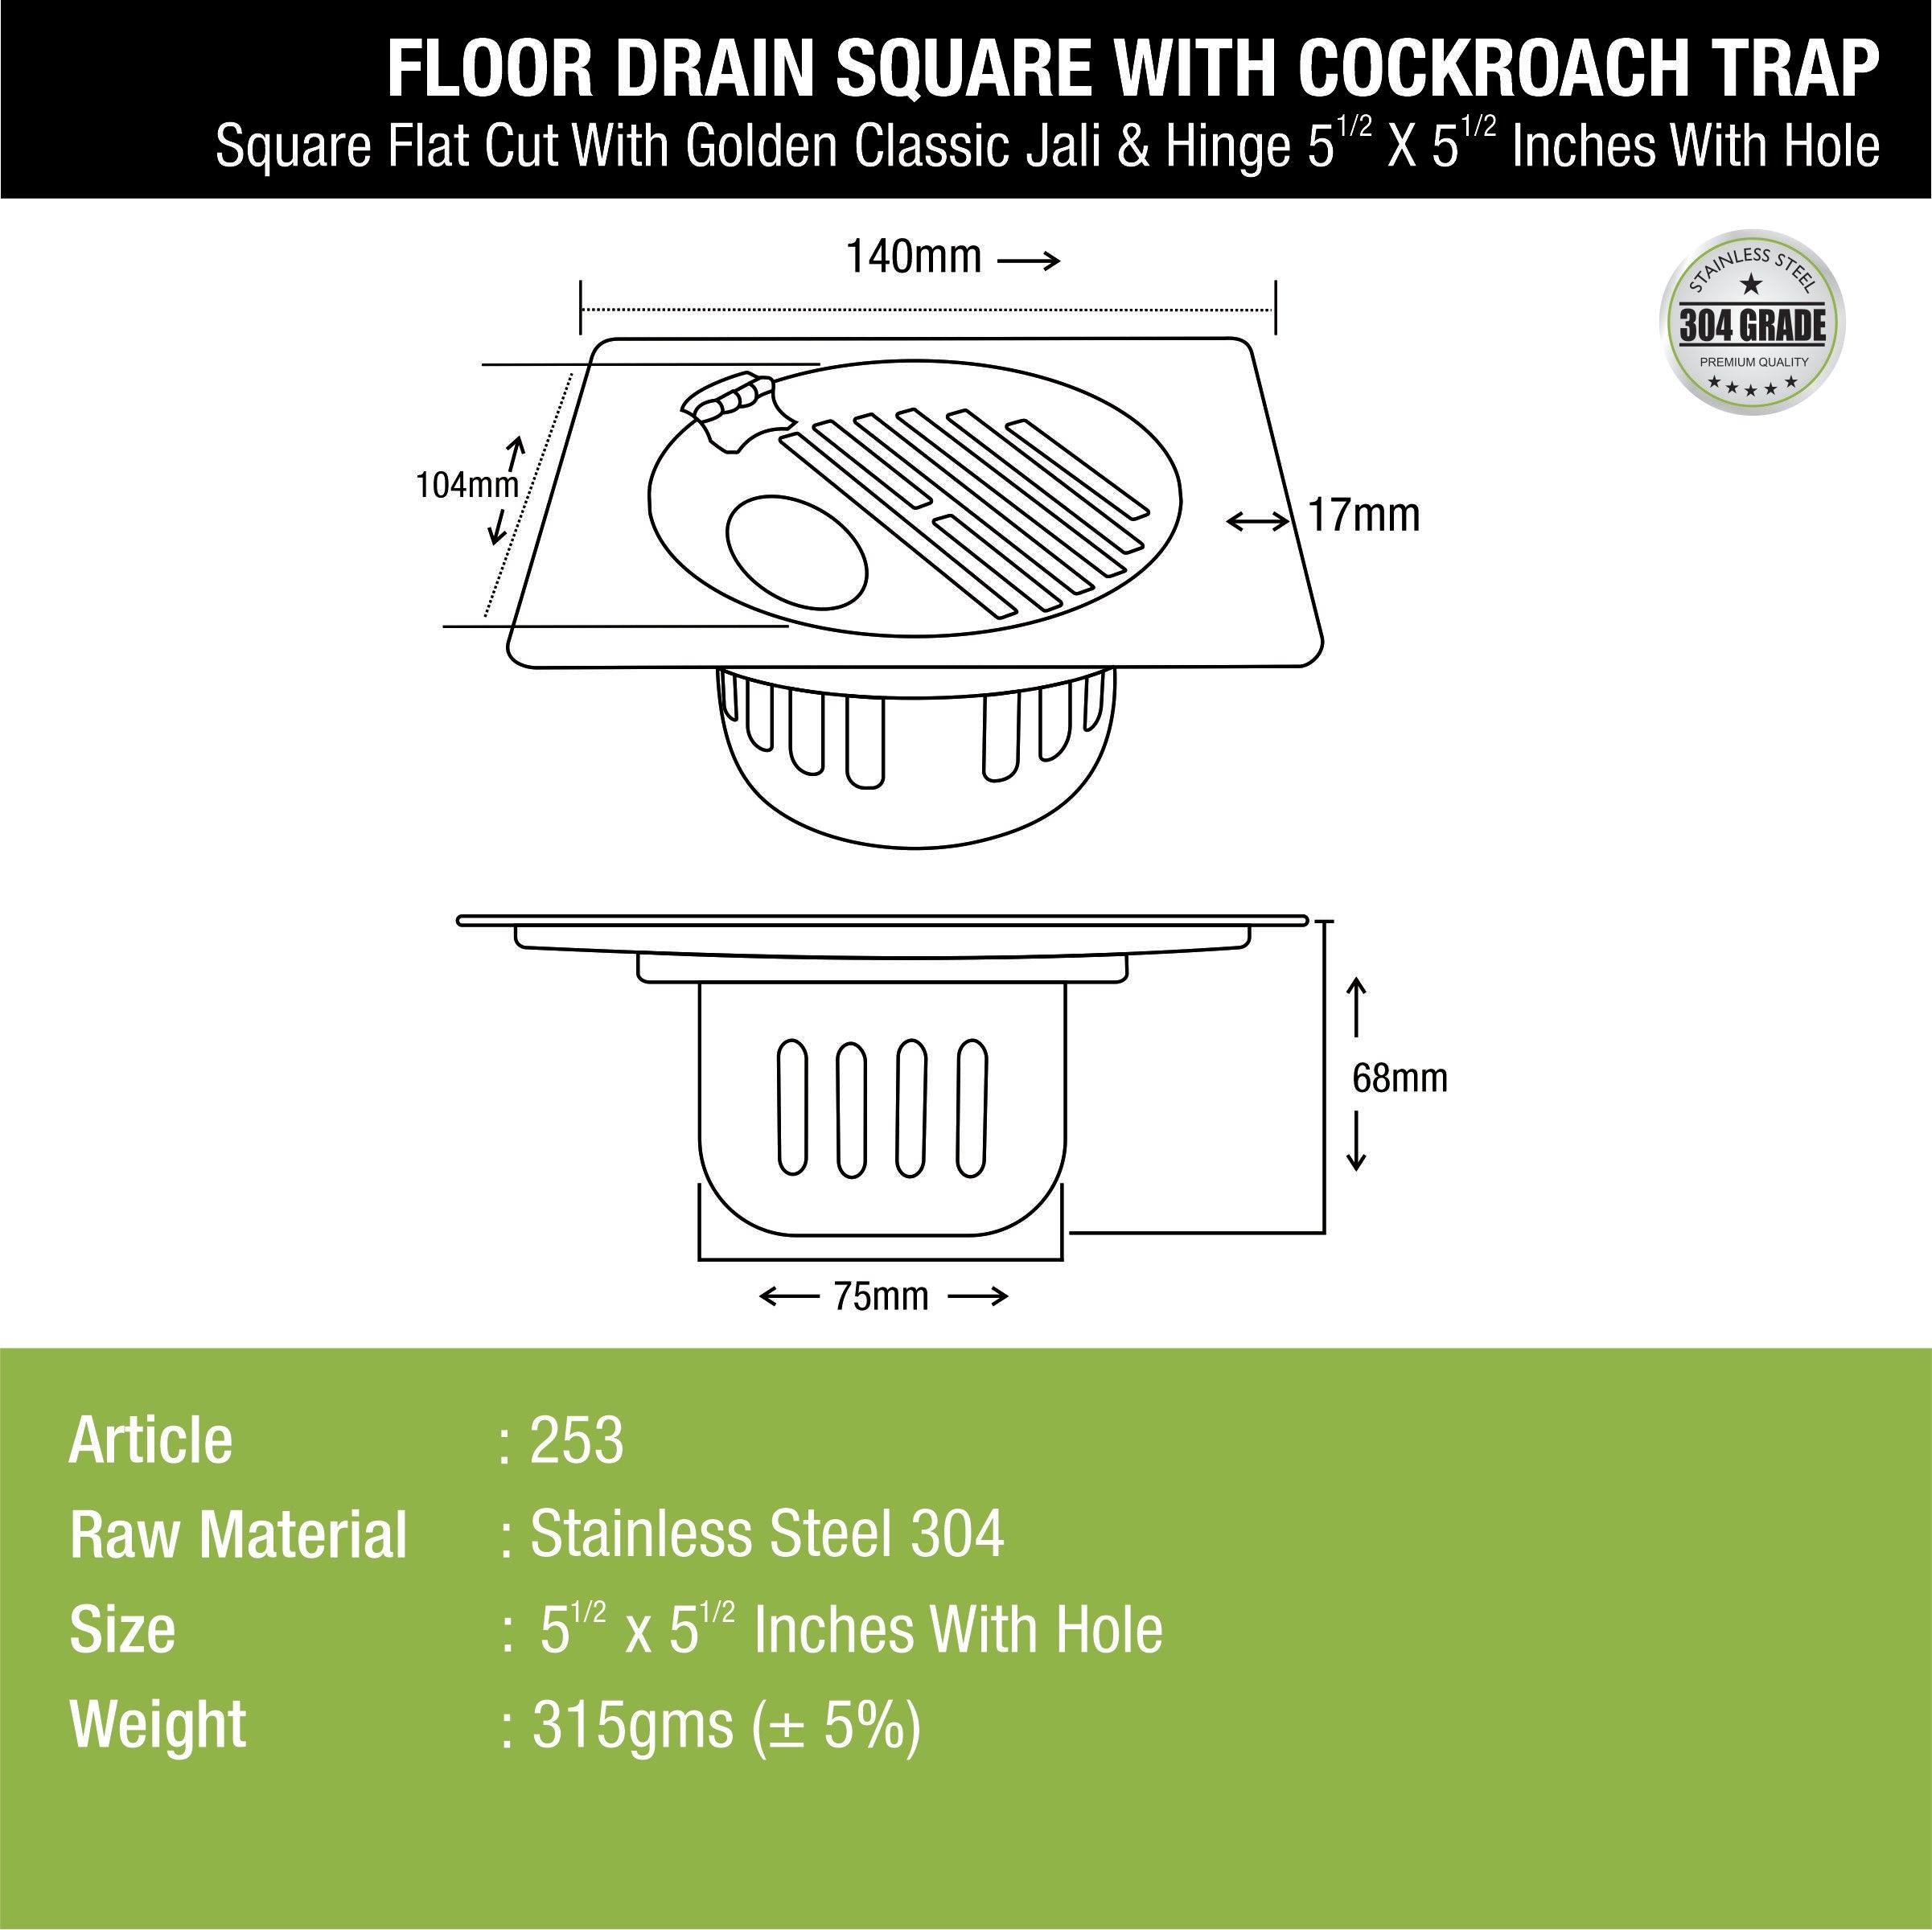 Golden Classic Jali Square Flat Cut Floor Drain (5.5 x 5.5 Inches) with Hinge, Hole and Cockroach Trap - LIPKA